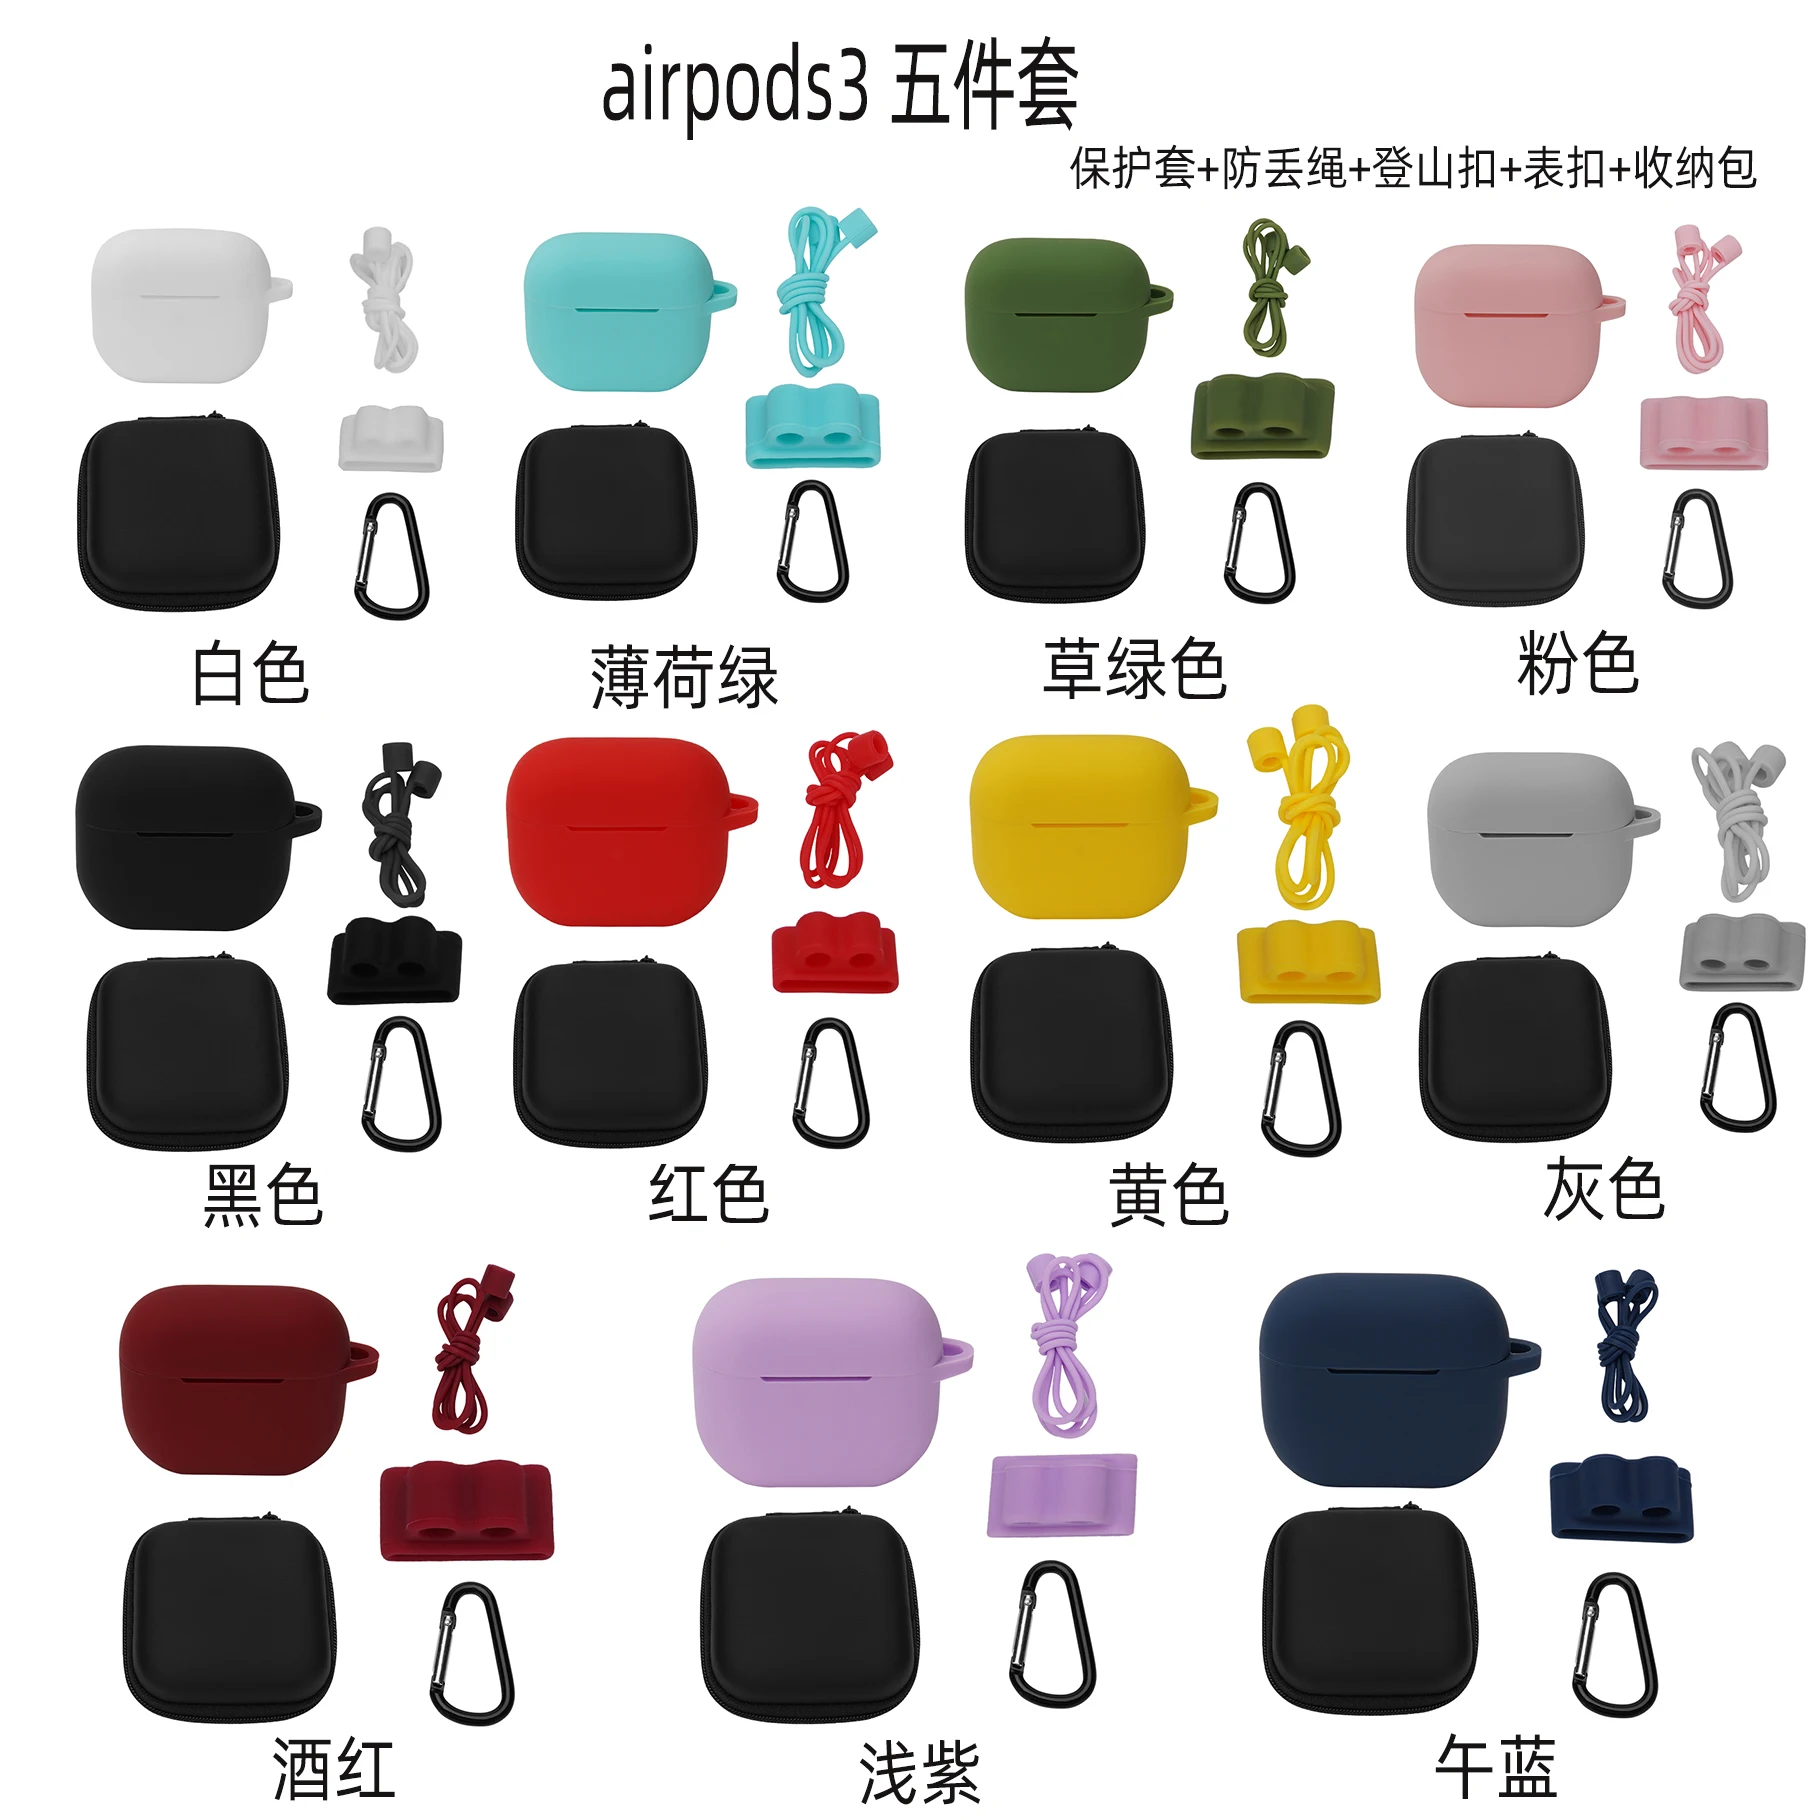 

New Silicone Cases for Airpods1 2nd Luxury Protective Earphone Cover Case for Apple for Airpods Case 1&2 Shockproof Sleeve, Multi colors